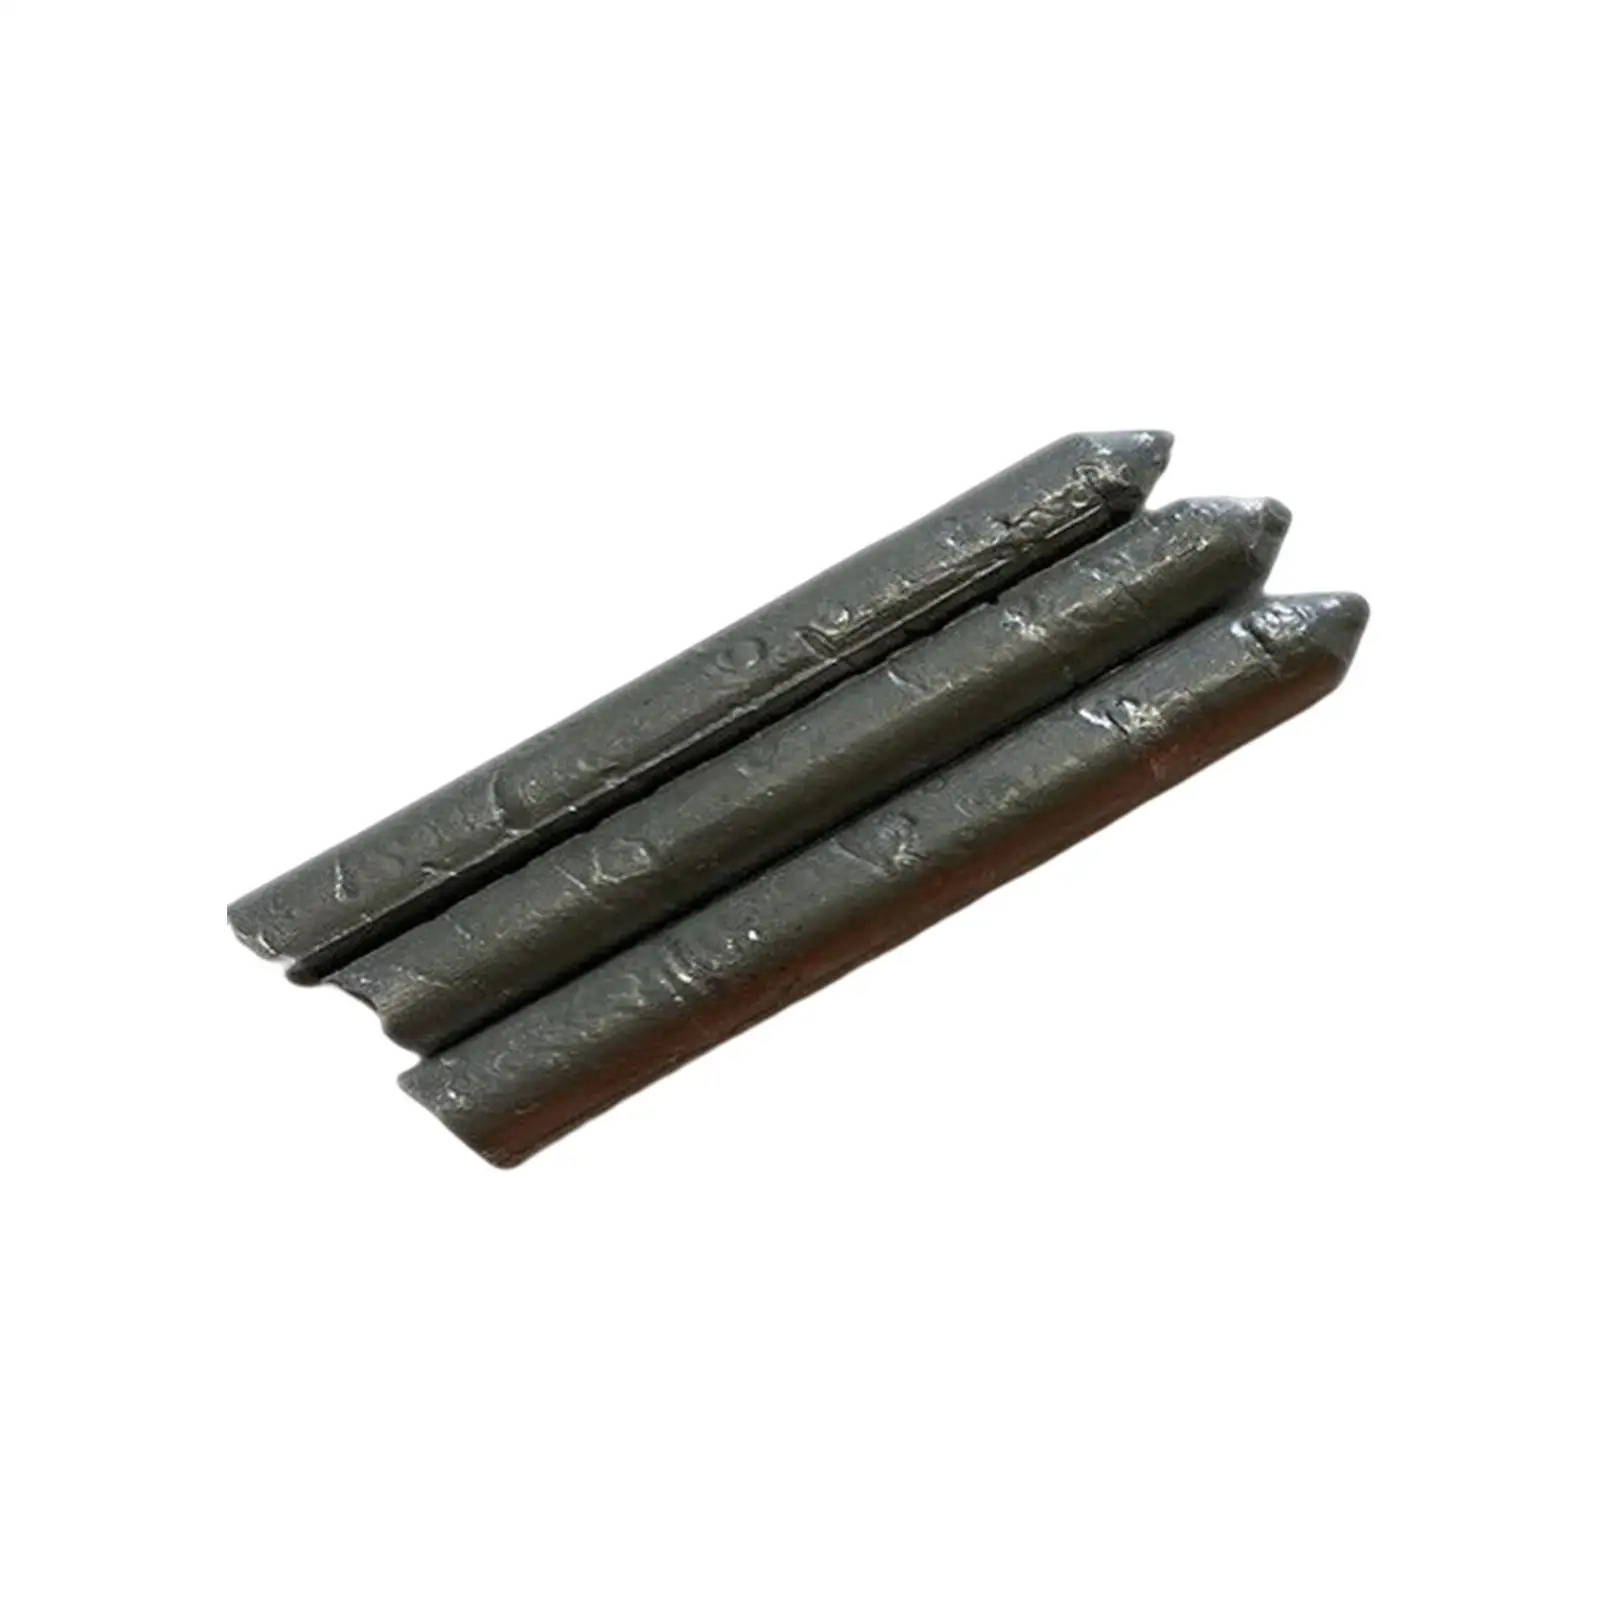 Welding Rods Low Temperature Easily Melt Core Rod for Stainless Steel